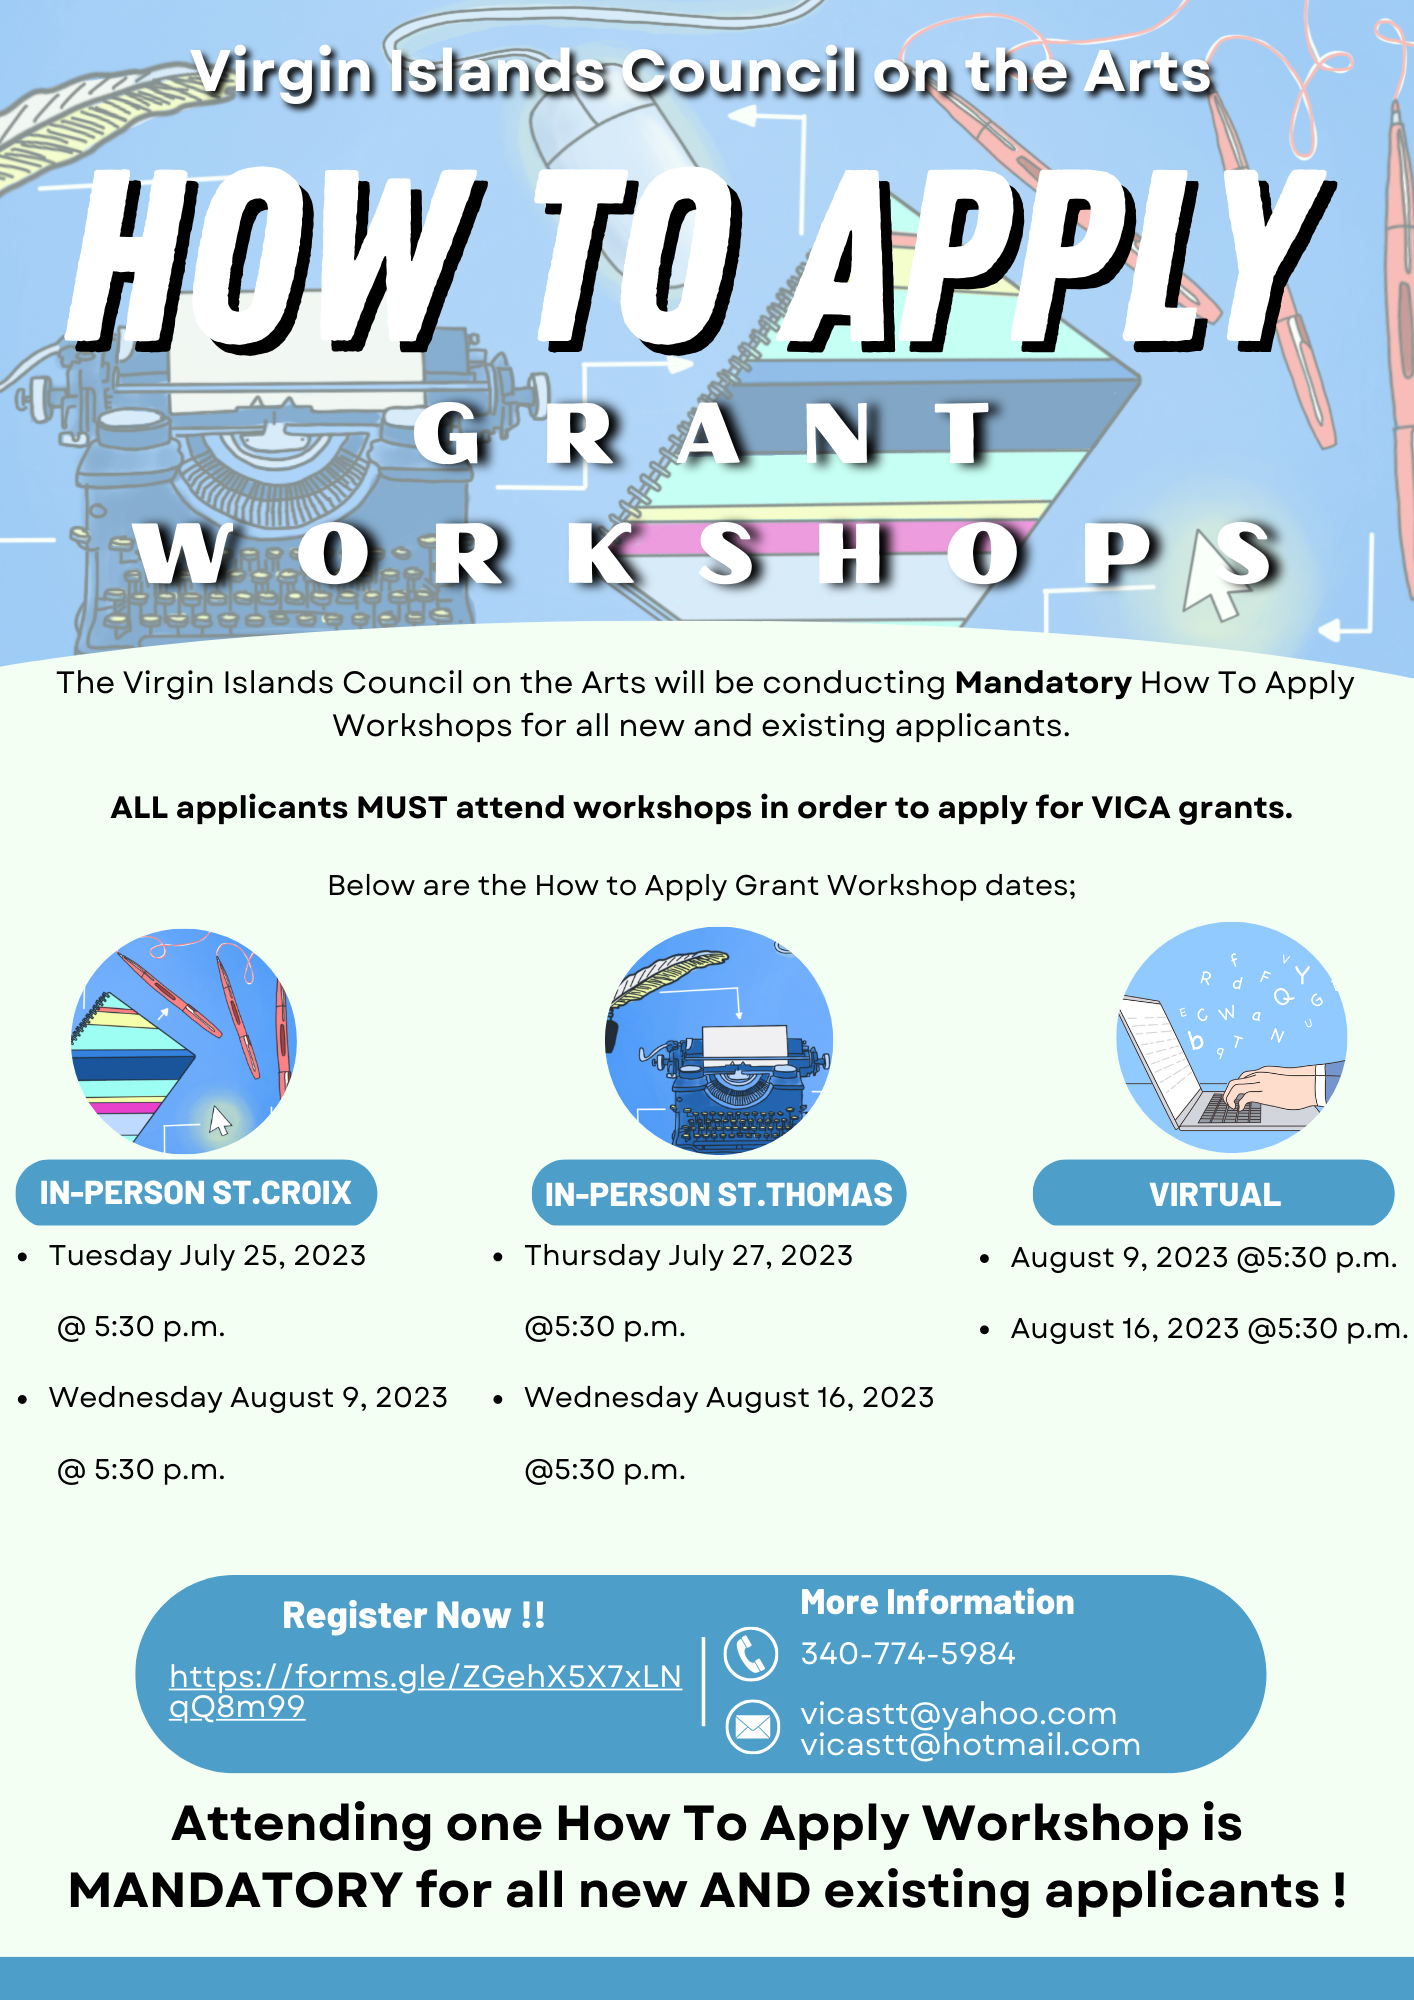 The Virgin Islands Council on the Arts invites ALL Applicants for our 2023/2024 Grant Cycle to attend this year's series of MANDATORY Workshops. All Applicants (whether new or existing) MUST attend at least ONE How to Apply Workshop to be eligible for our Annual VICA Grant. Please feel free to call us at 340-774-5984 with any questions or inquiries. 
❗️REGISTER for Workshops here: https://forms.gle/iC8YzKTz1uZGJnB28 
ZOOM LINKS BELOW: 
August 9, 2023 @5:30 p.m. https://us02web.zoom.us/j/88923770002...
August 16, 2023 @5:30 p.m.   
https://us02web.zoom.us/j/82491750661...